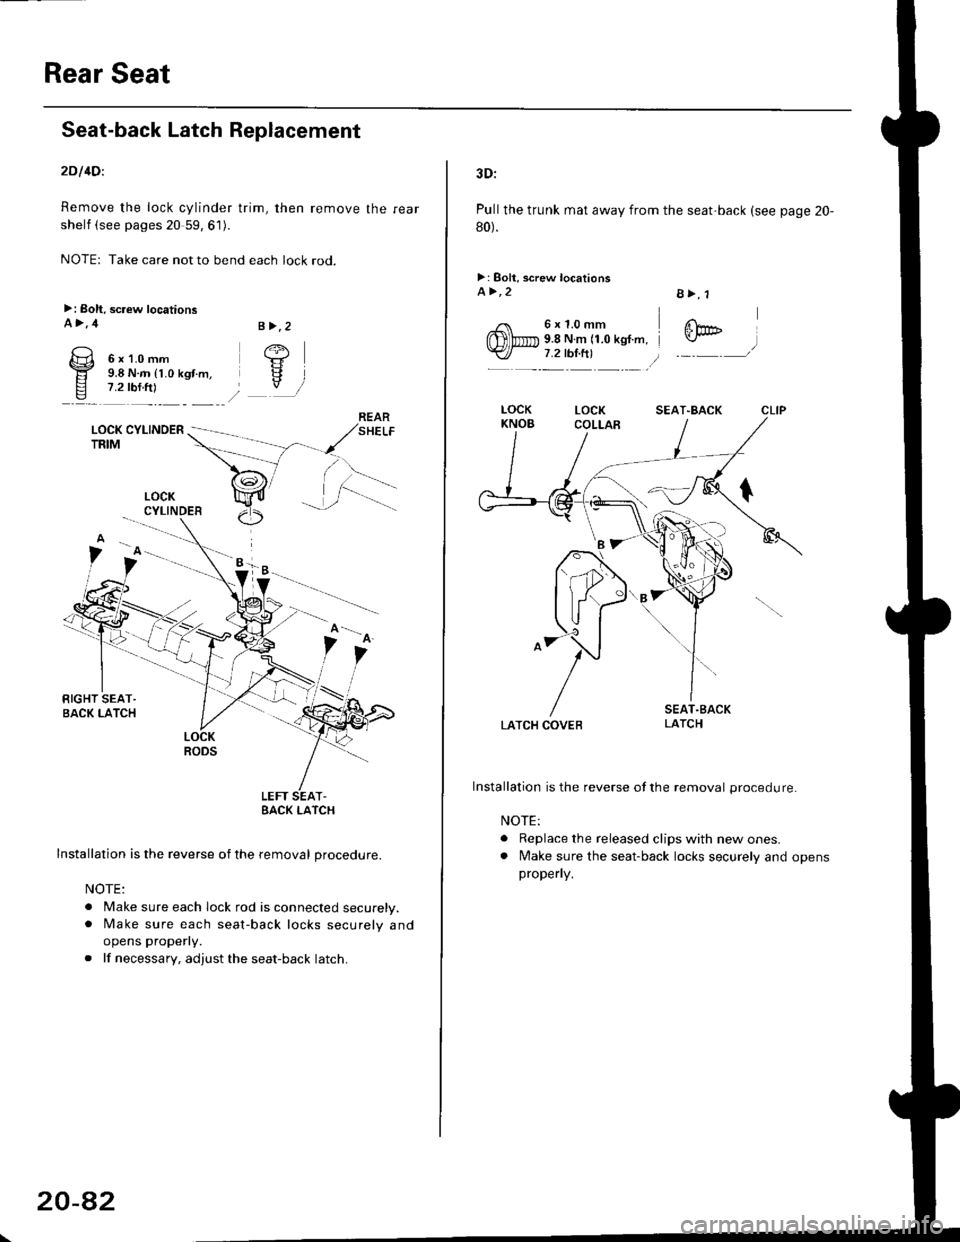 HONDA CIVIC 1998 6.G Workshop Manual Rear Seat
Seat-back Latch Replacement
2Dl4Dl
Remove the lock cylinder trim, then remove the rear
shelf (see pages 20 59, 61).
NOTE: Take care not to bend each lock rod.
>: Boh, screw locationsA>,4
6x1